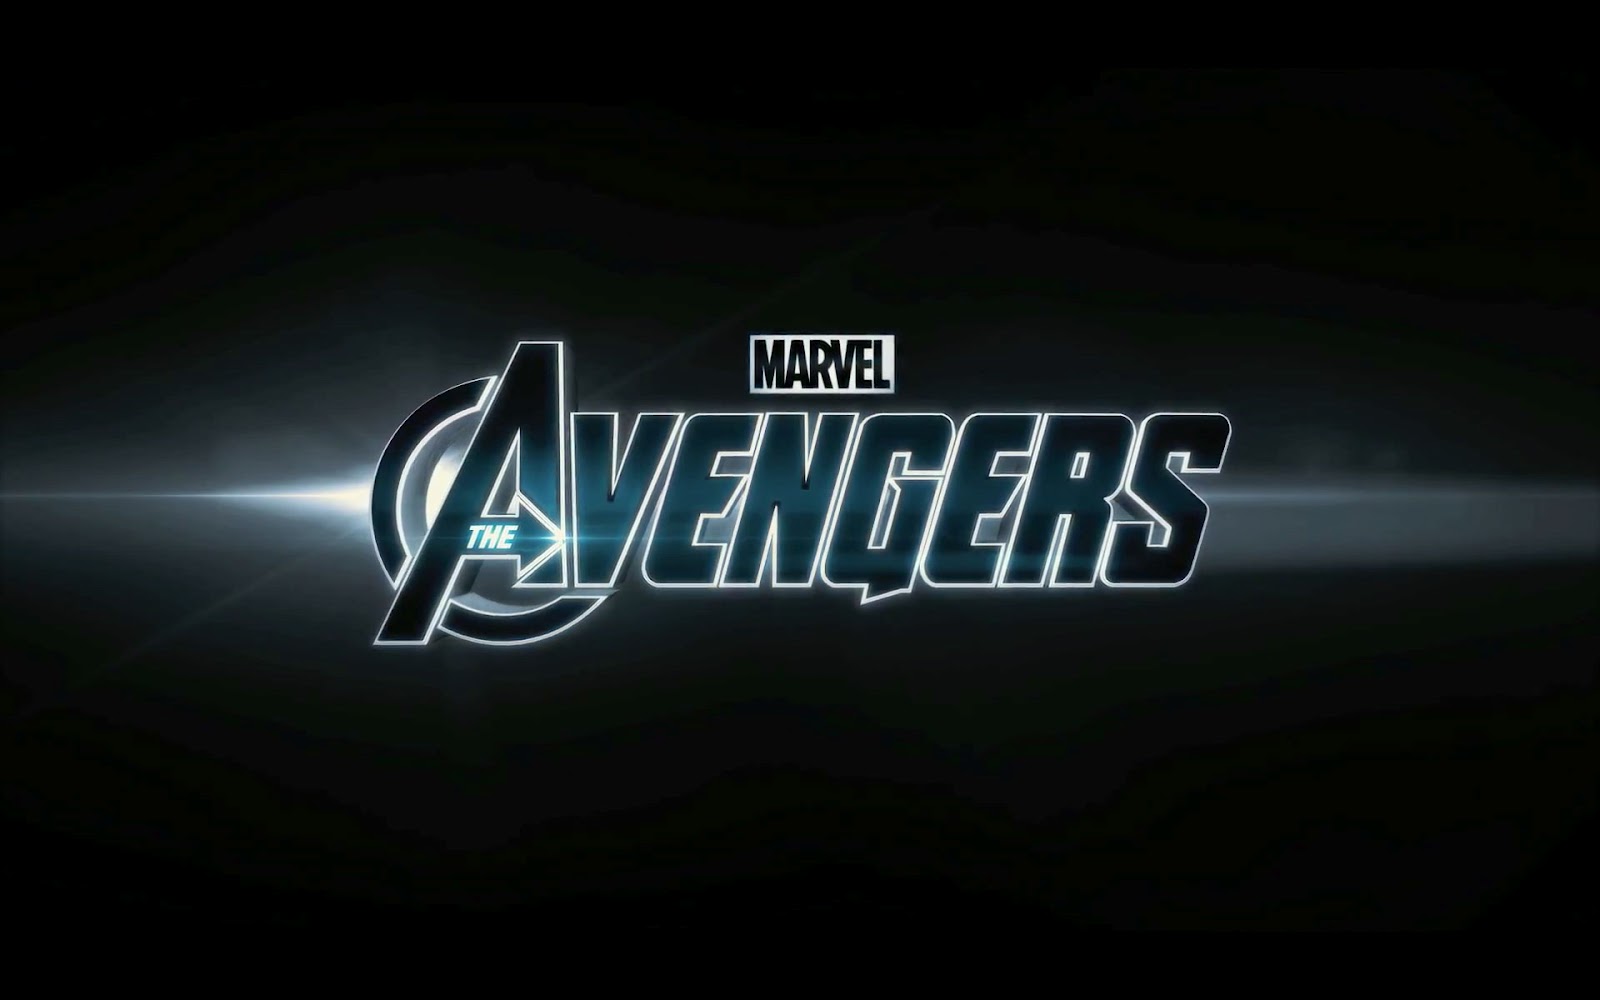 Beautiful HD Wallpapers The Avengers 2012 Movie Wallpaper 1600x1000